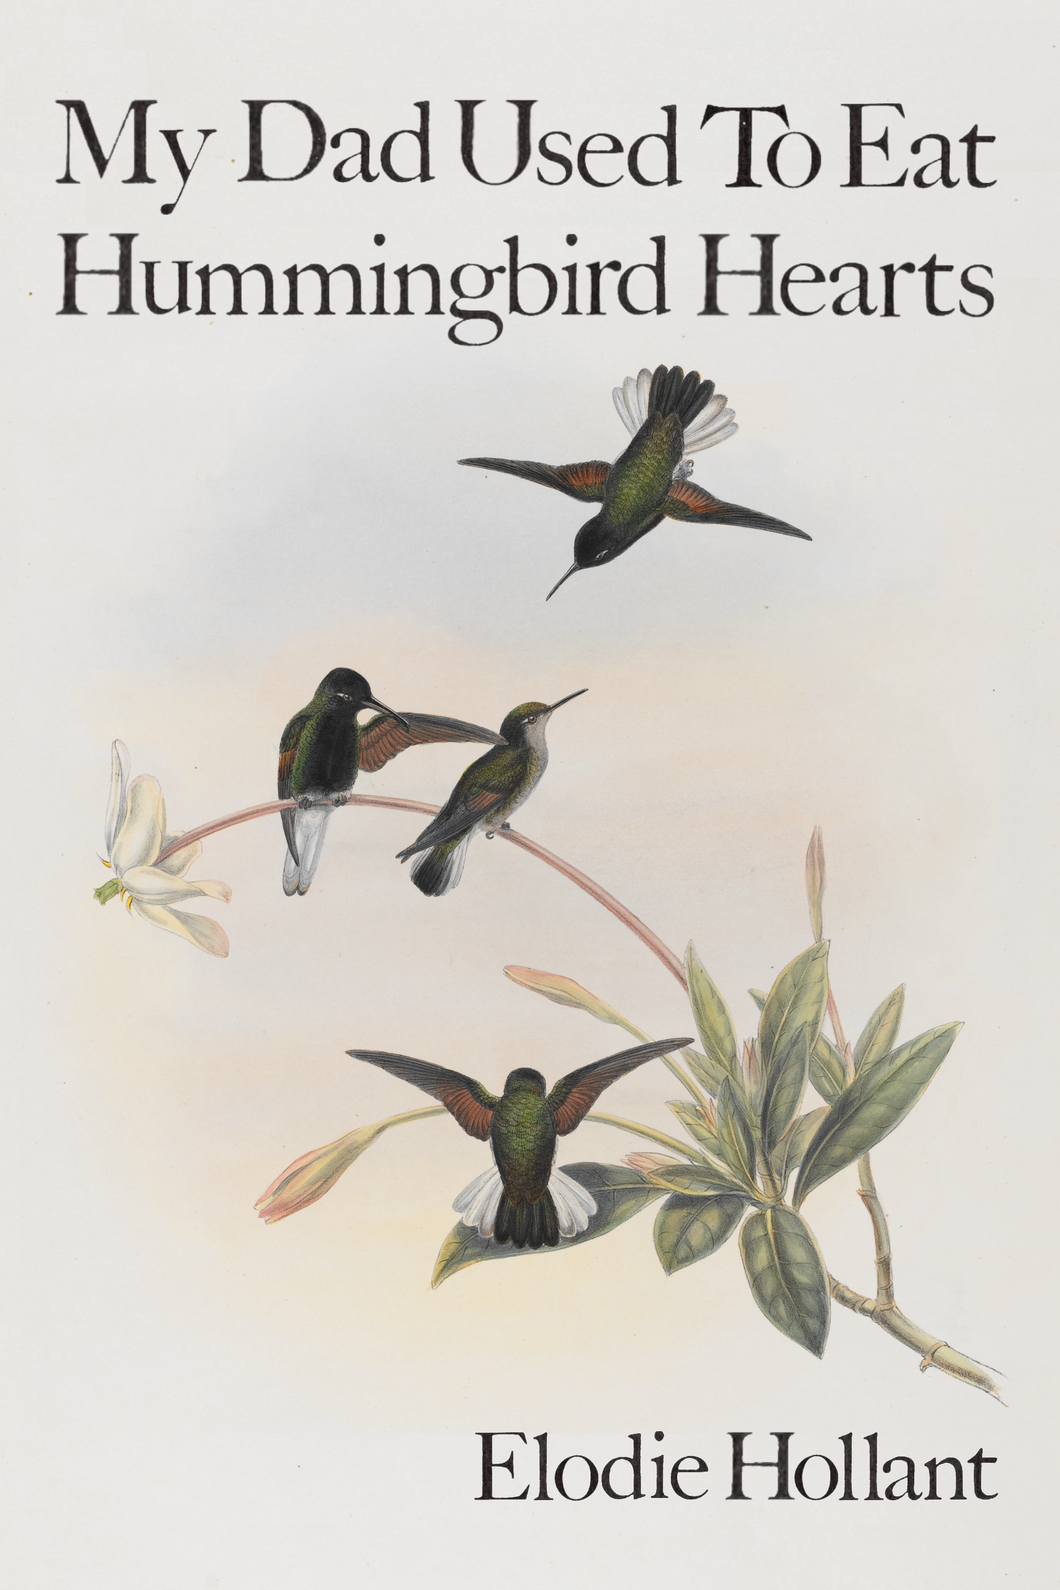 My Dad Used To Eat Hummingbird Hearts, by Elodie Hollant-Print Books-Bottlecap Press